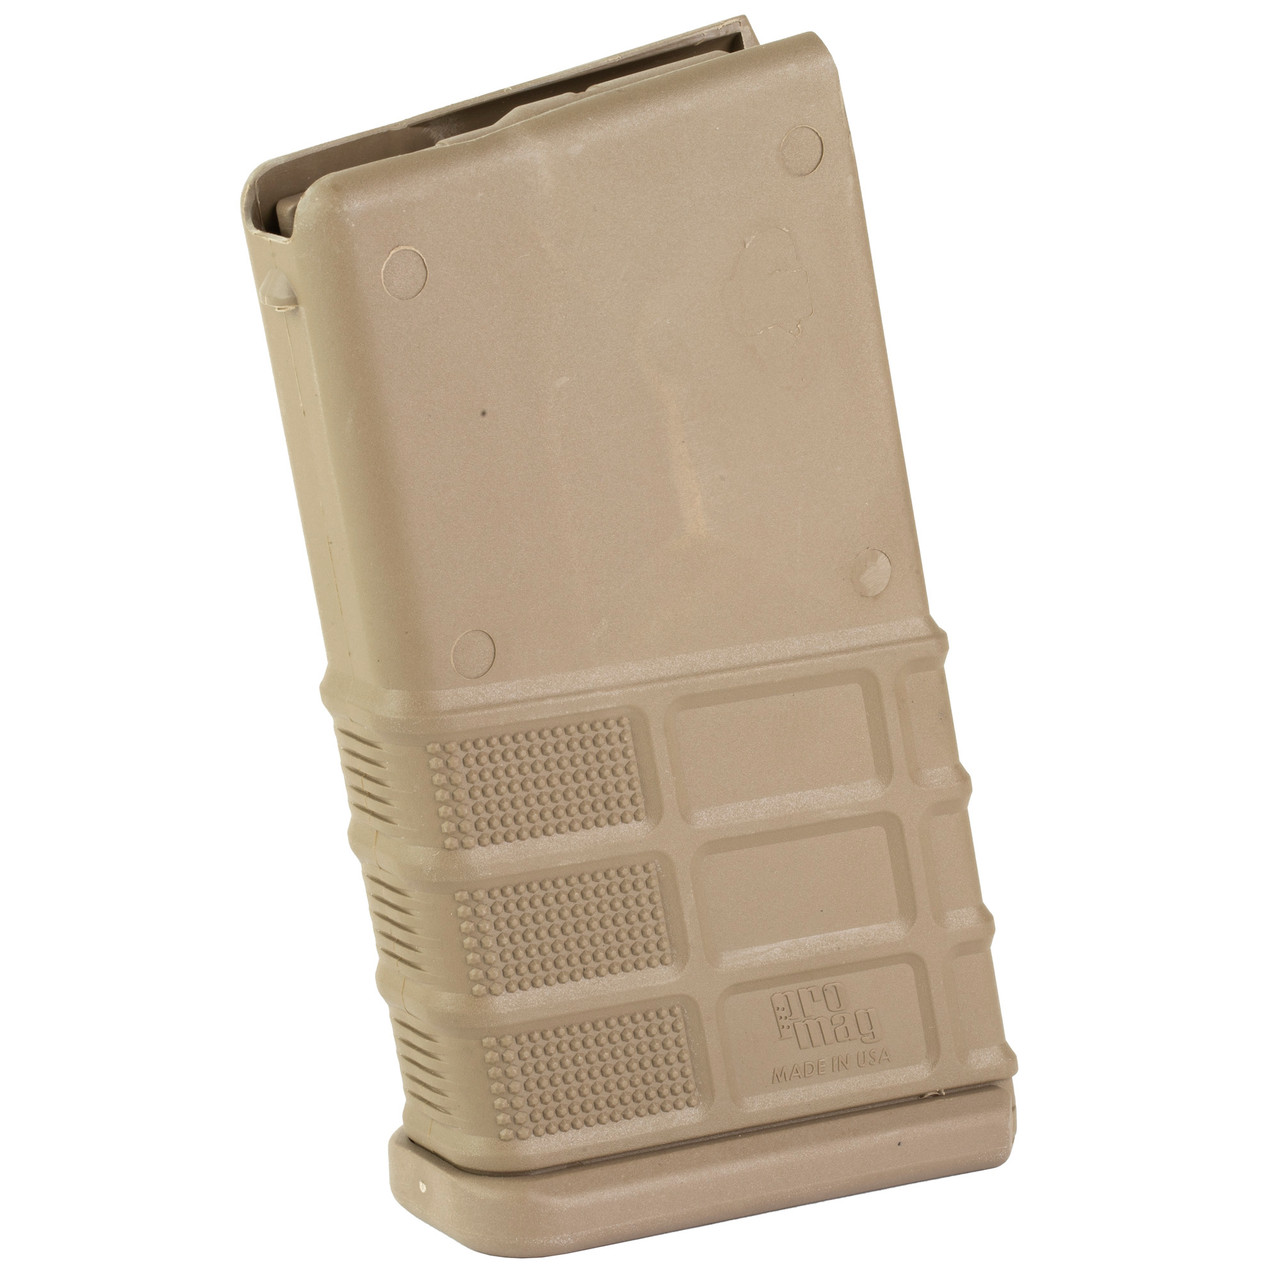 Promag Fn Fal .308 20rd Polymer Fde